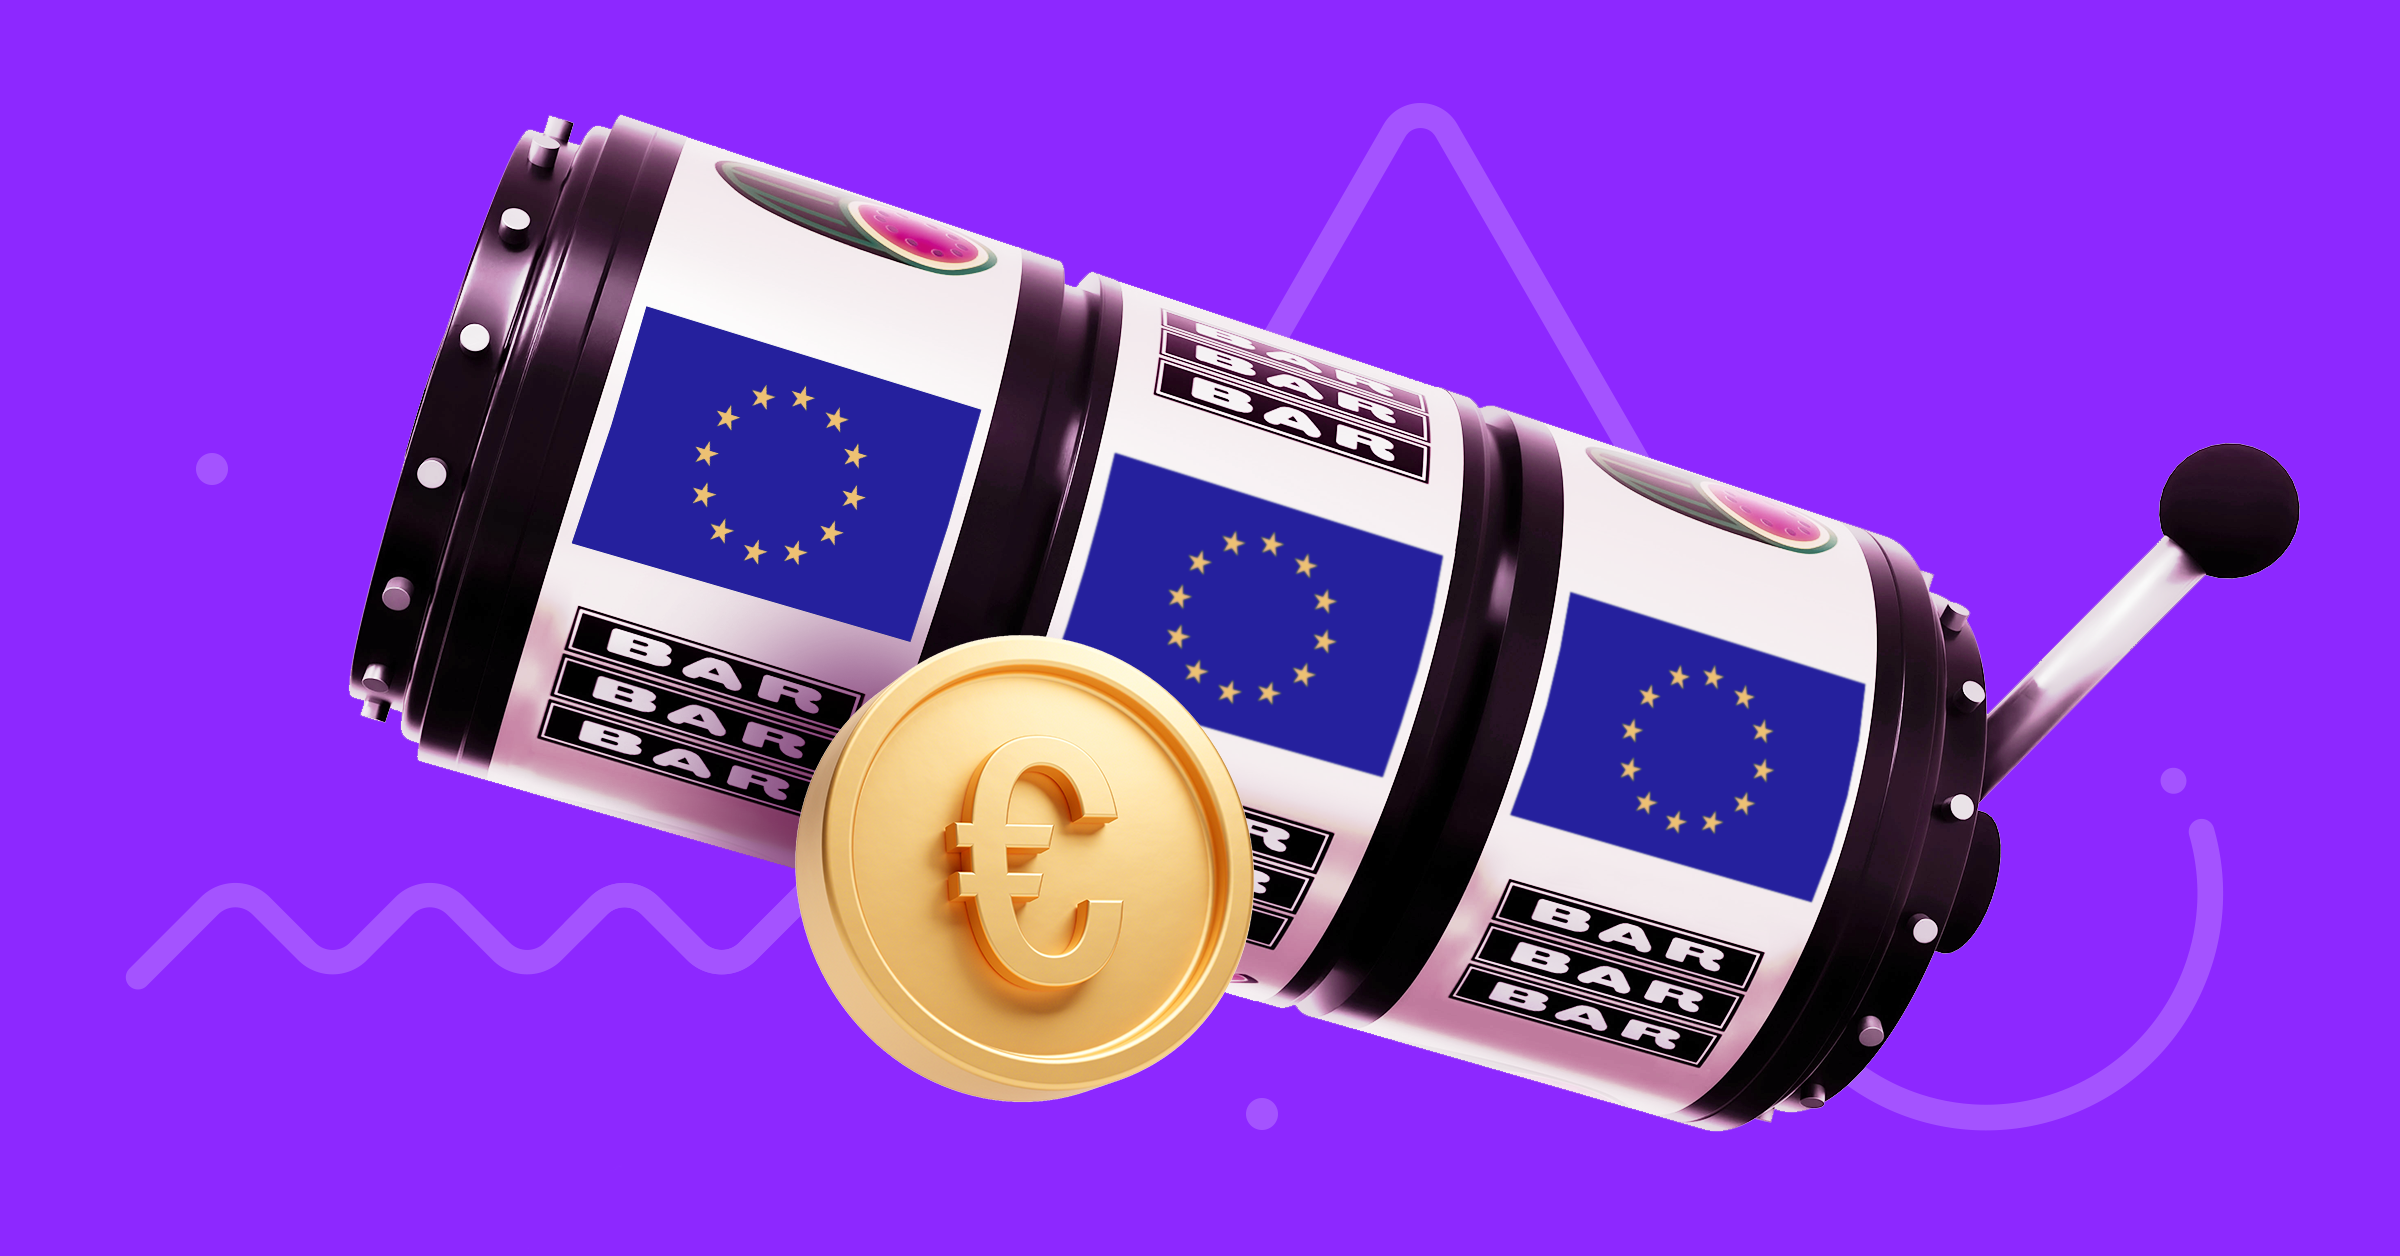 Gambling and Lotteries in the EU